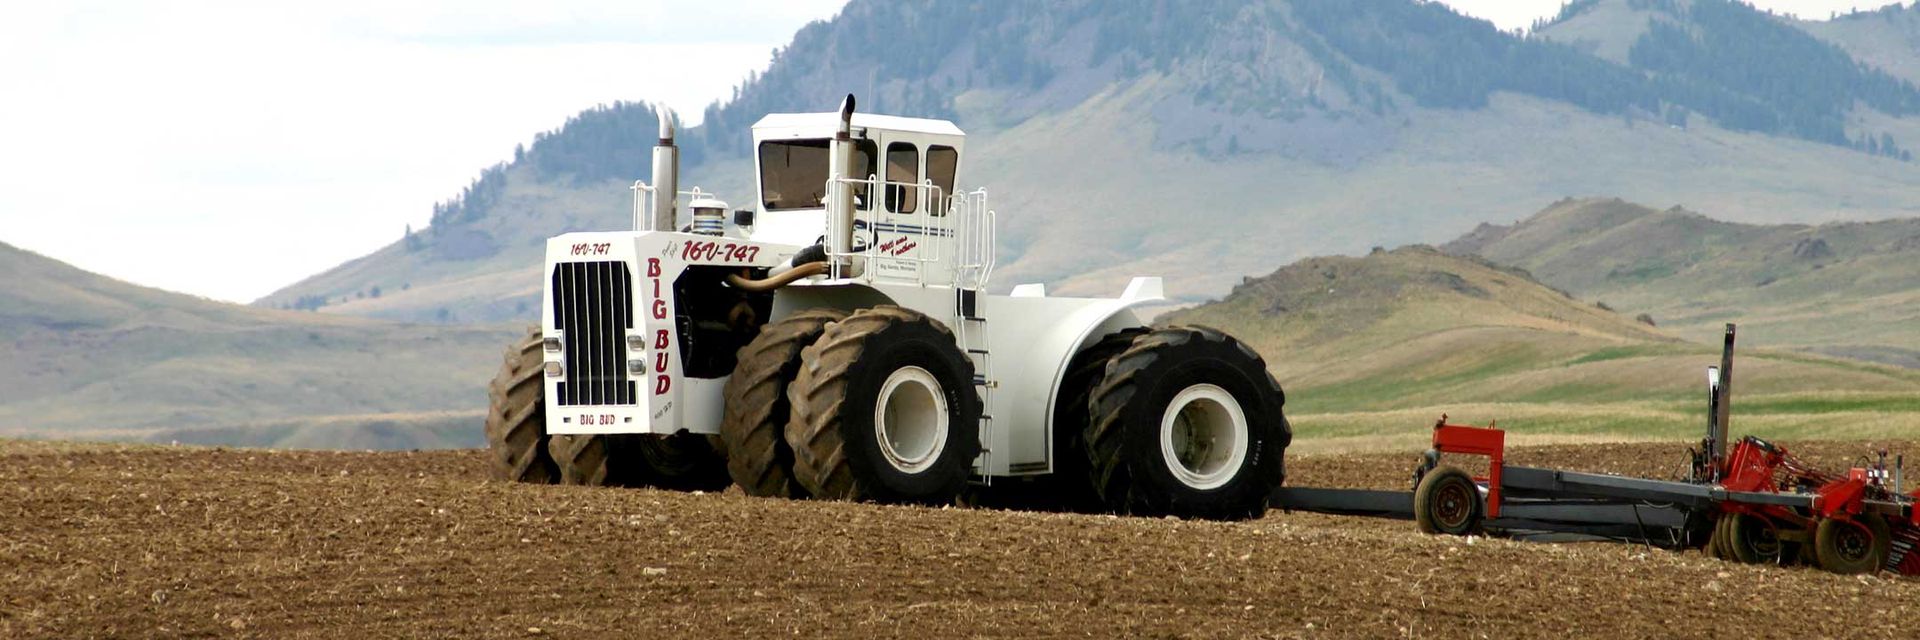 World's Largest Farm Tractor, world record in Havre, Montana